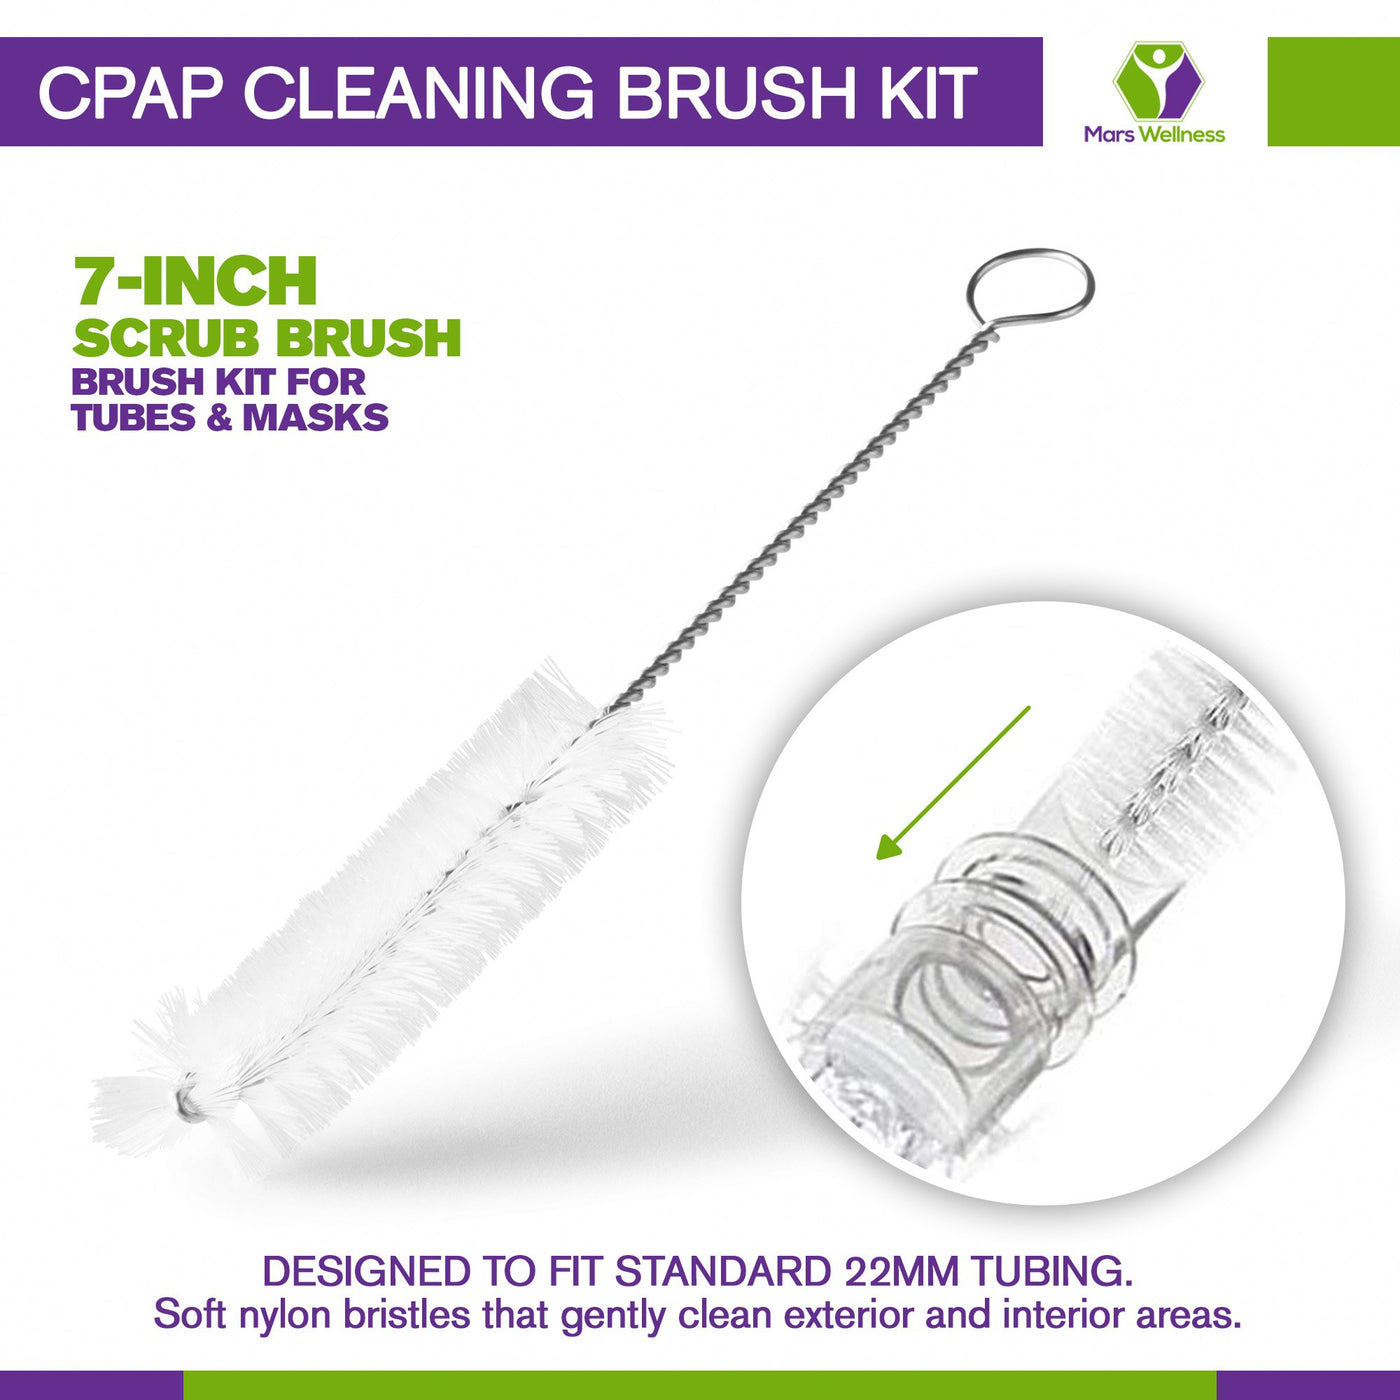 Best Cleaning Brushes - Make Cleaning Quick and Easy